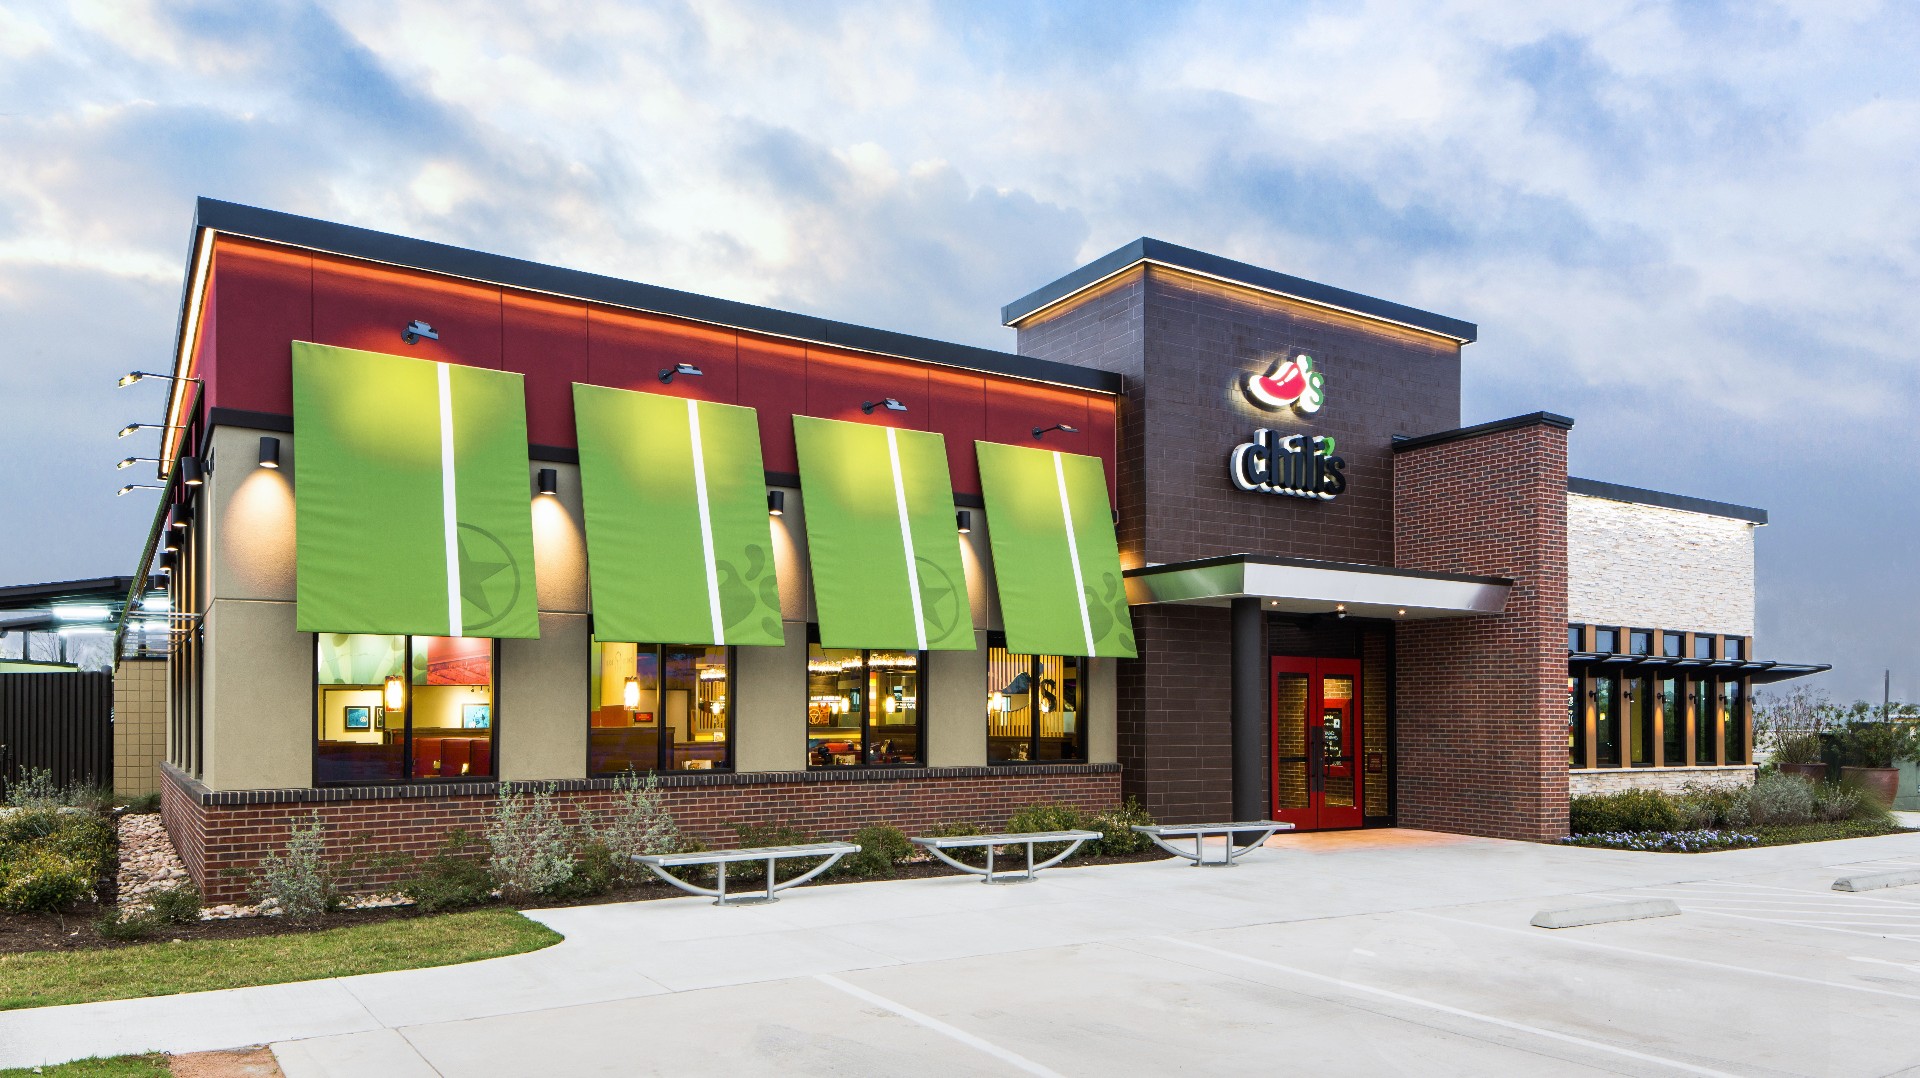 Chili's manager takes away vet's free meal on Veterans Day